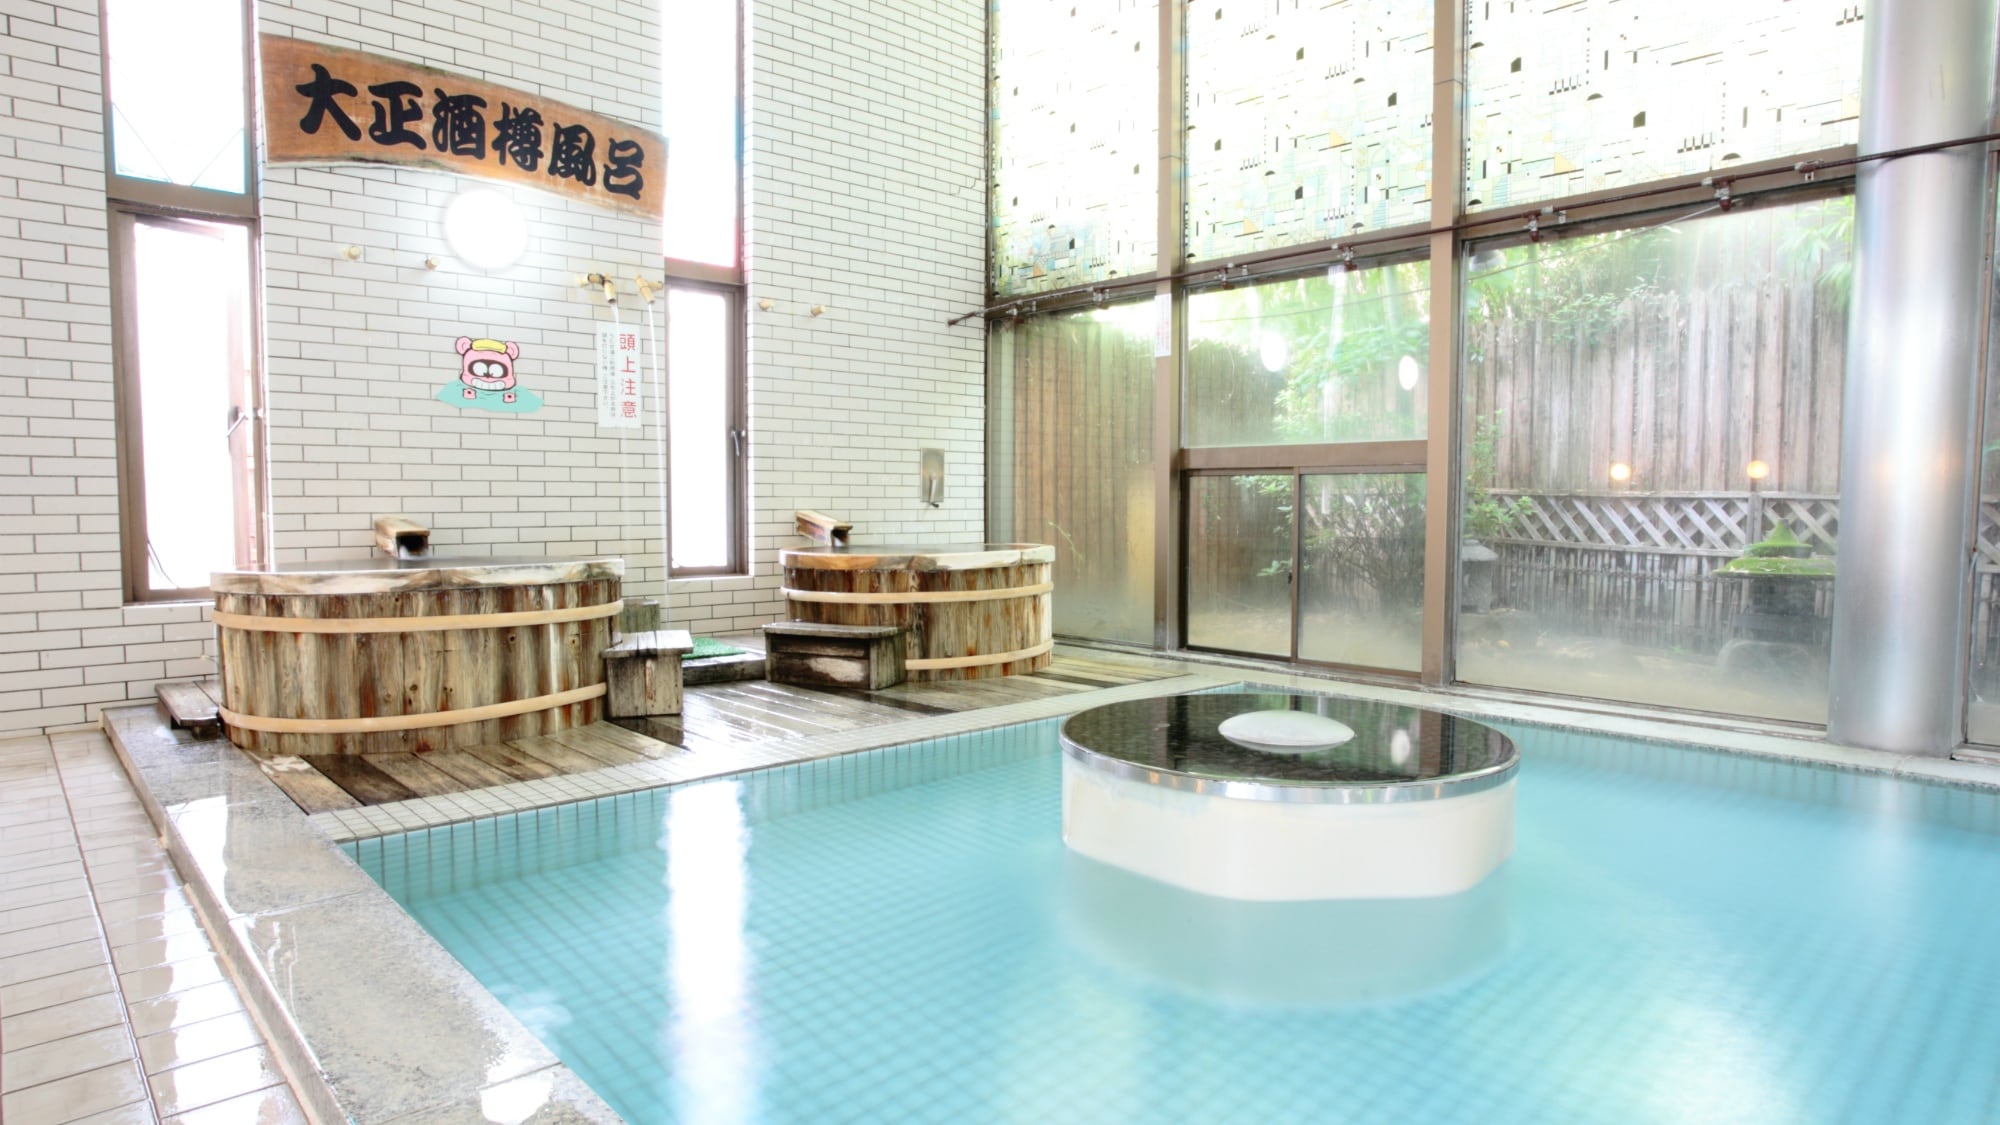 Tonoyu: The spacious large communal bath is a natural hot spring with abundant amounts of hot water. It is a luxurious hot spring where the source is flowing.